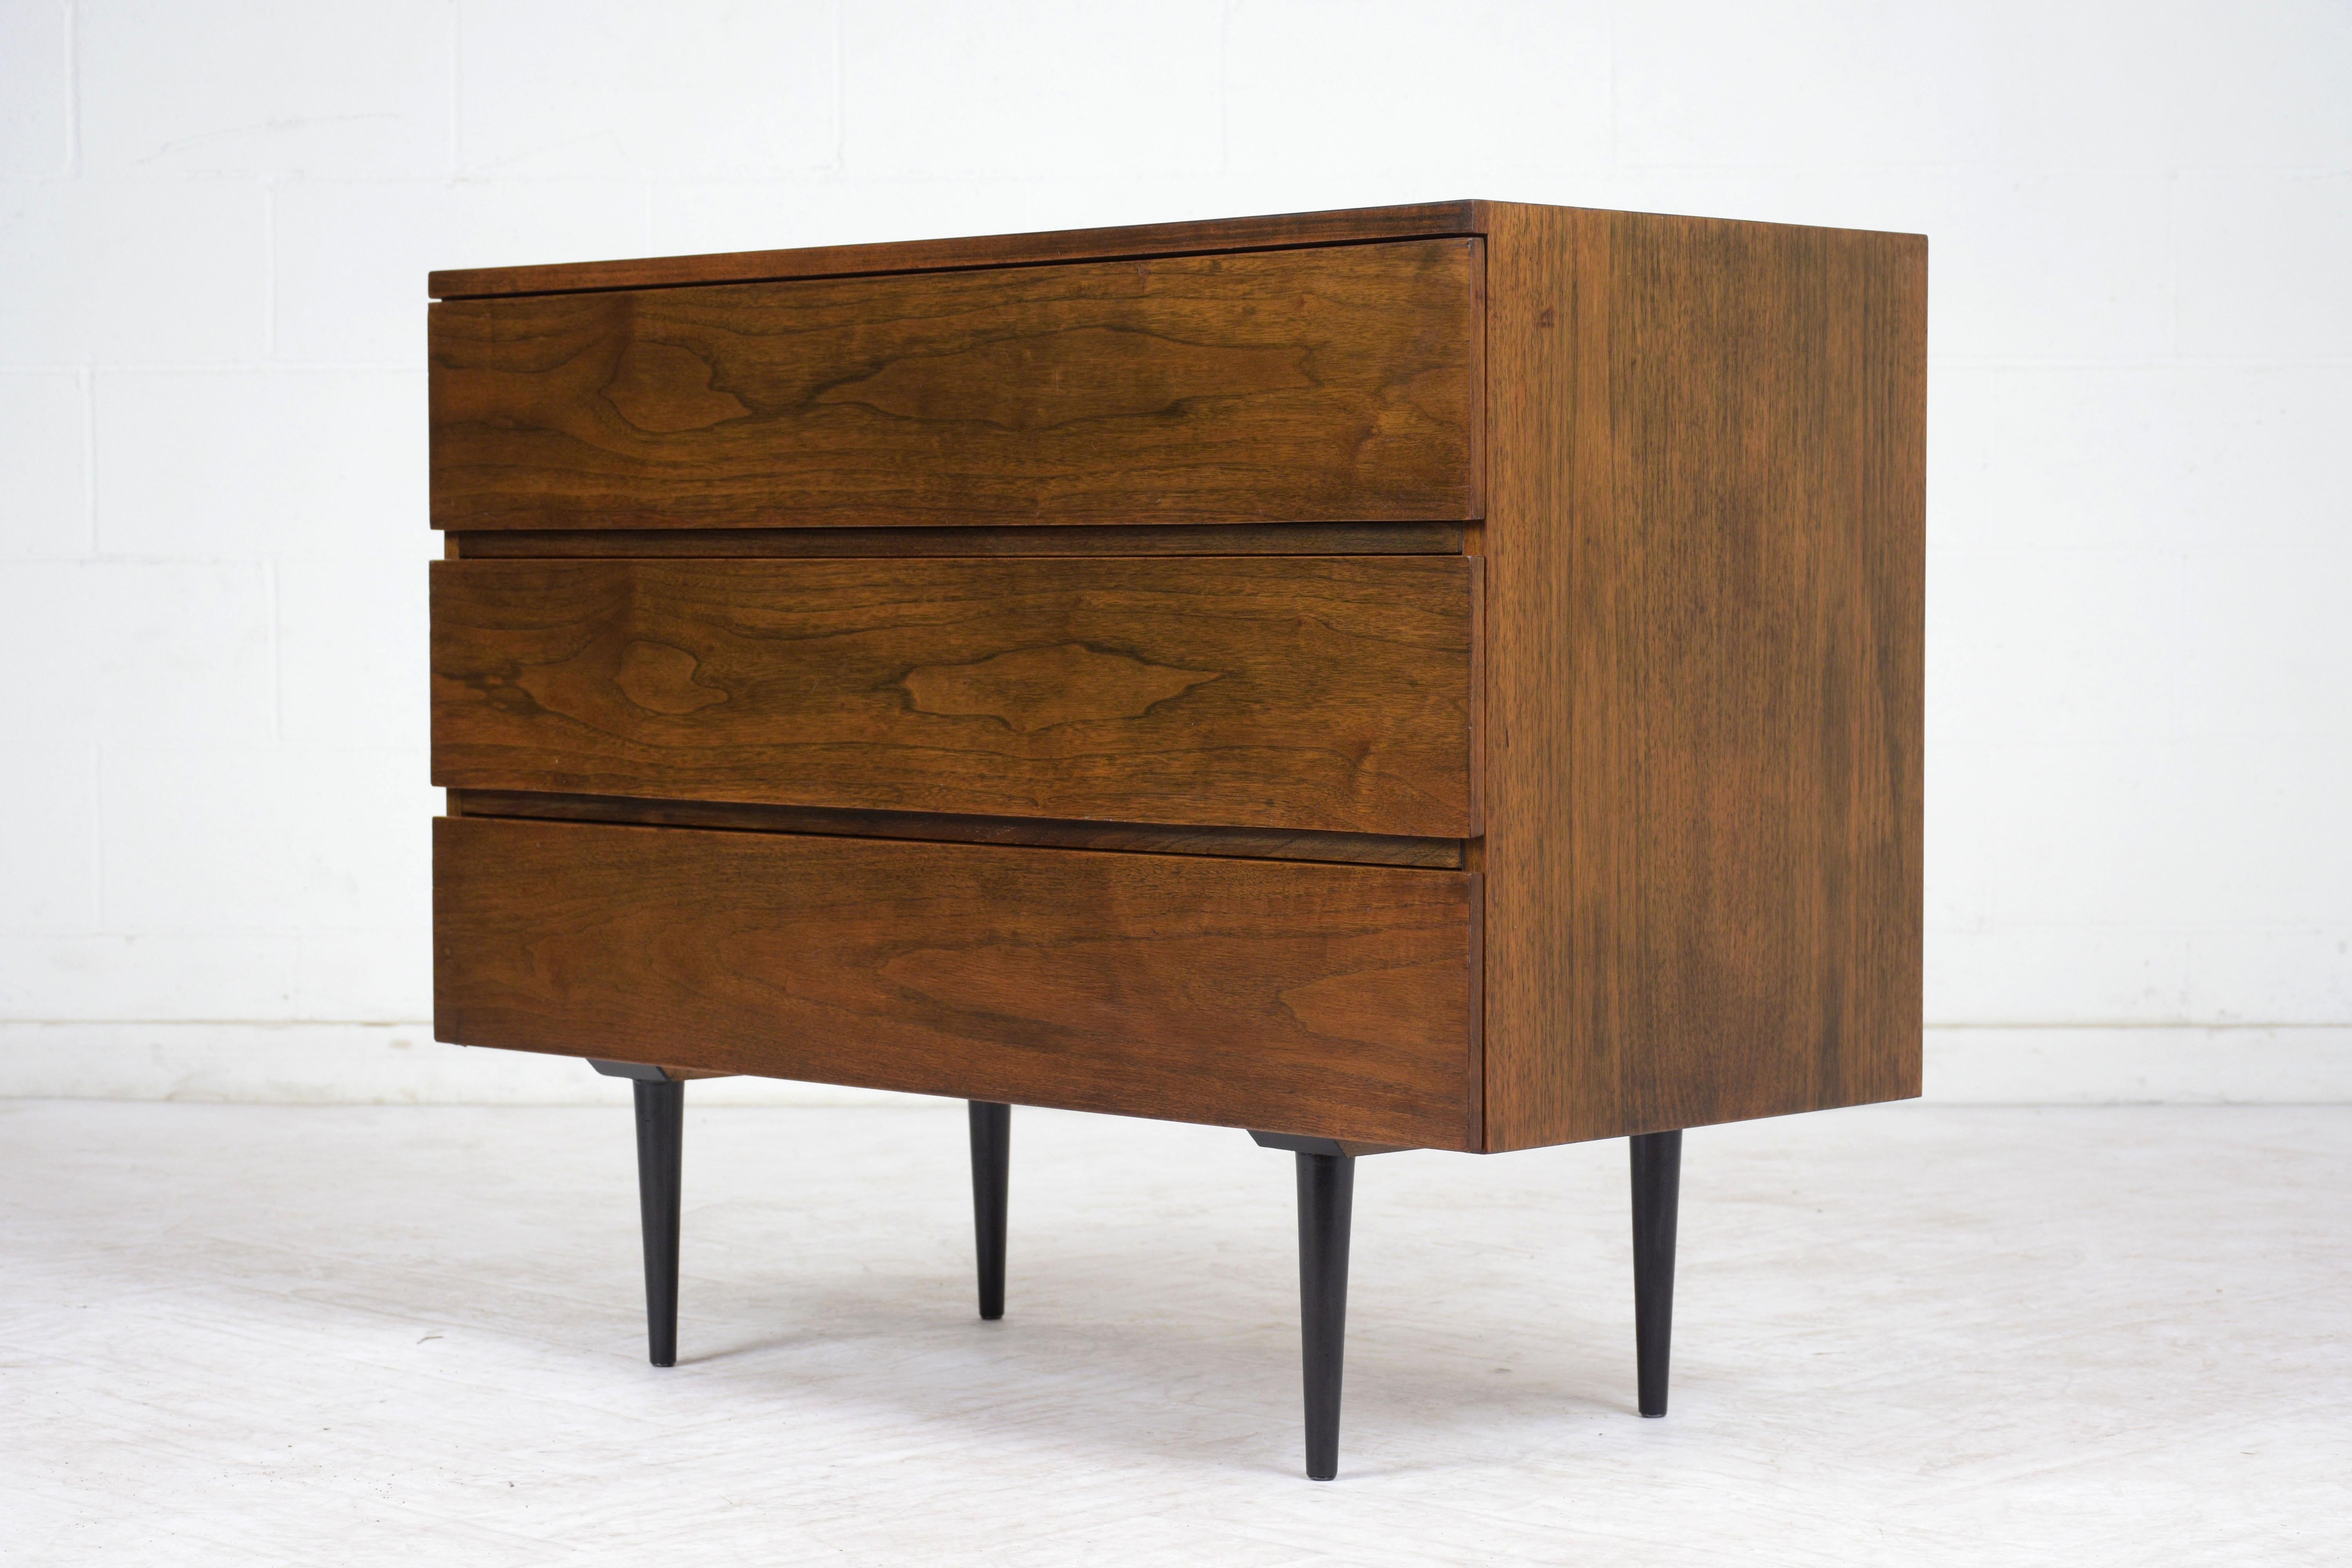 American Mid-Century Modern Style Chest of Drawers